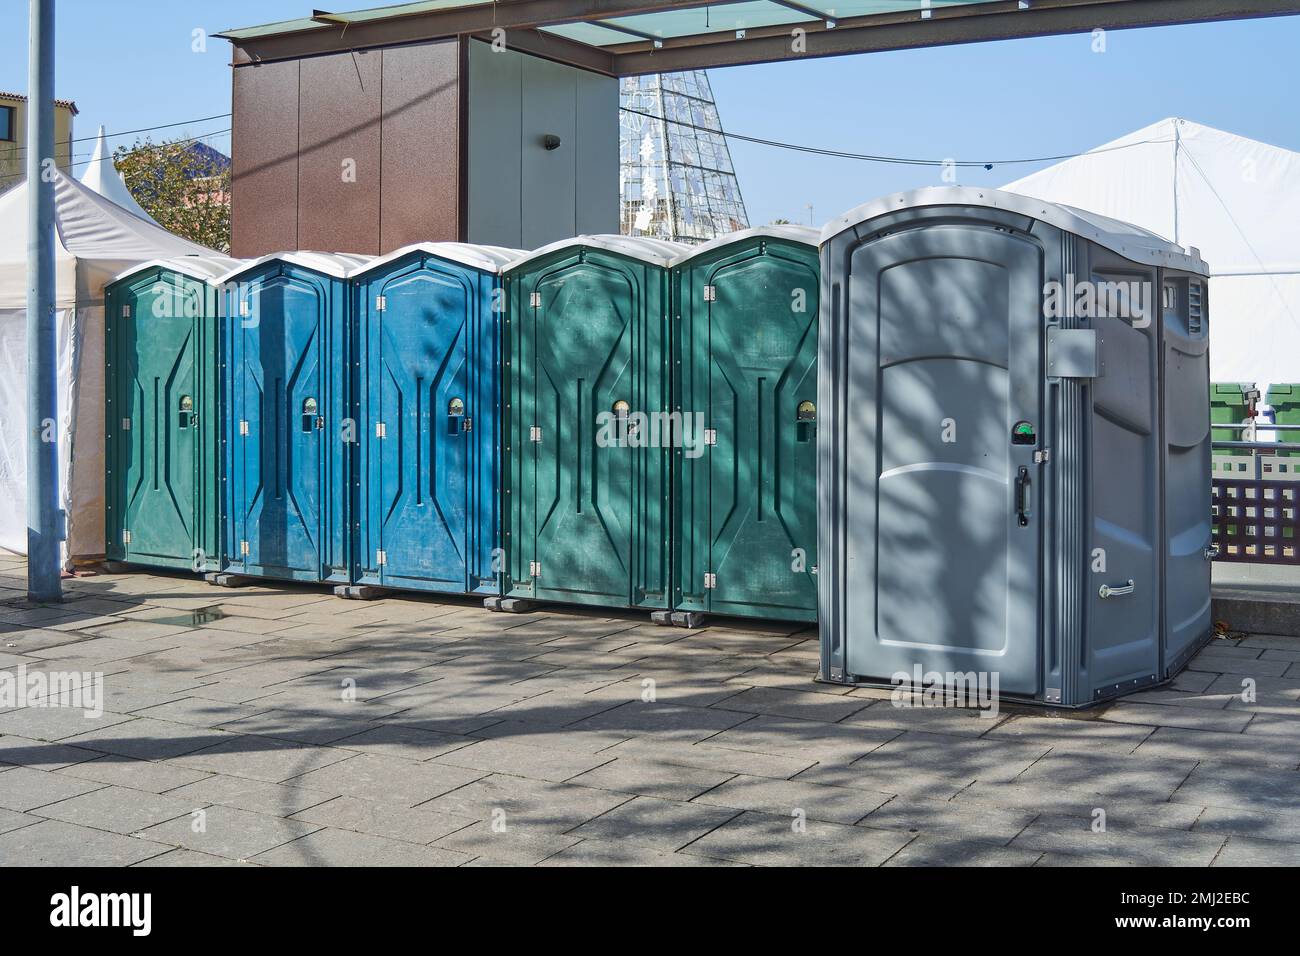 Six plastic toilet cabins of different colors. Public toilets in the town square. Stock Photo